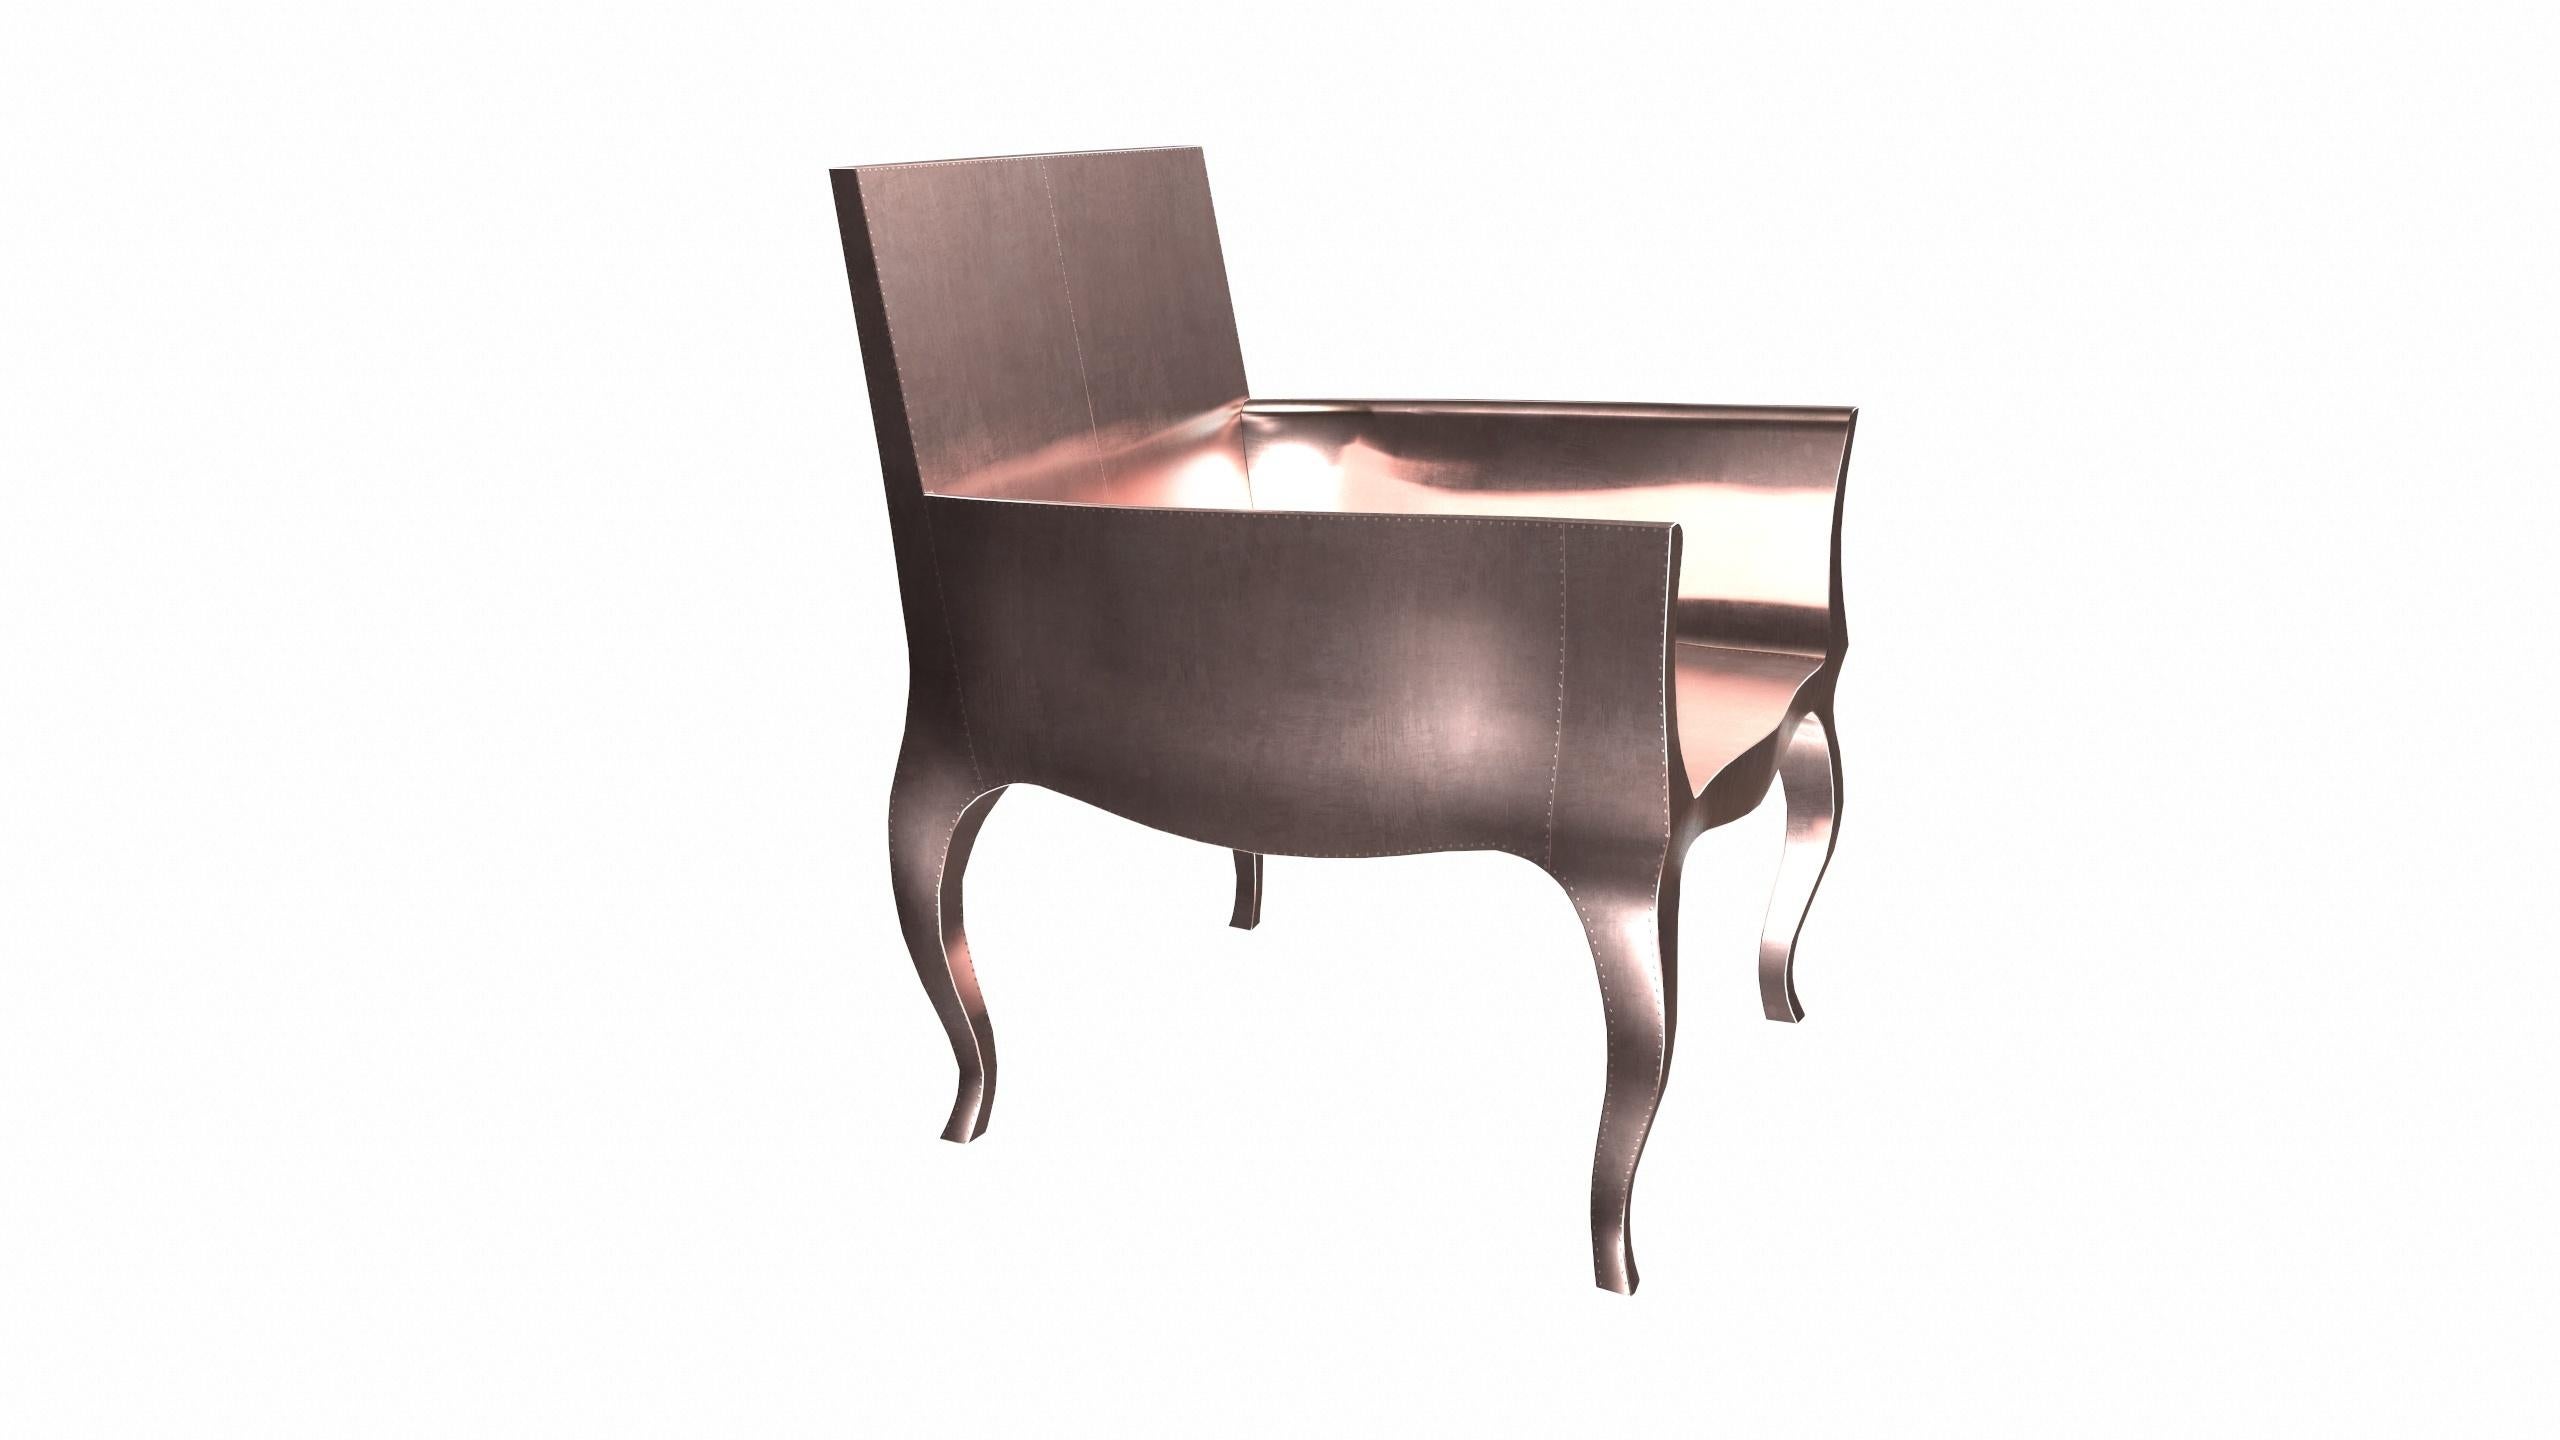 Hand-Carved Art Nouveau Dining Chairs in Smooth Copper by Paul Mathieu for S. Odegard For Sale